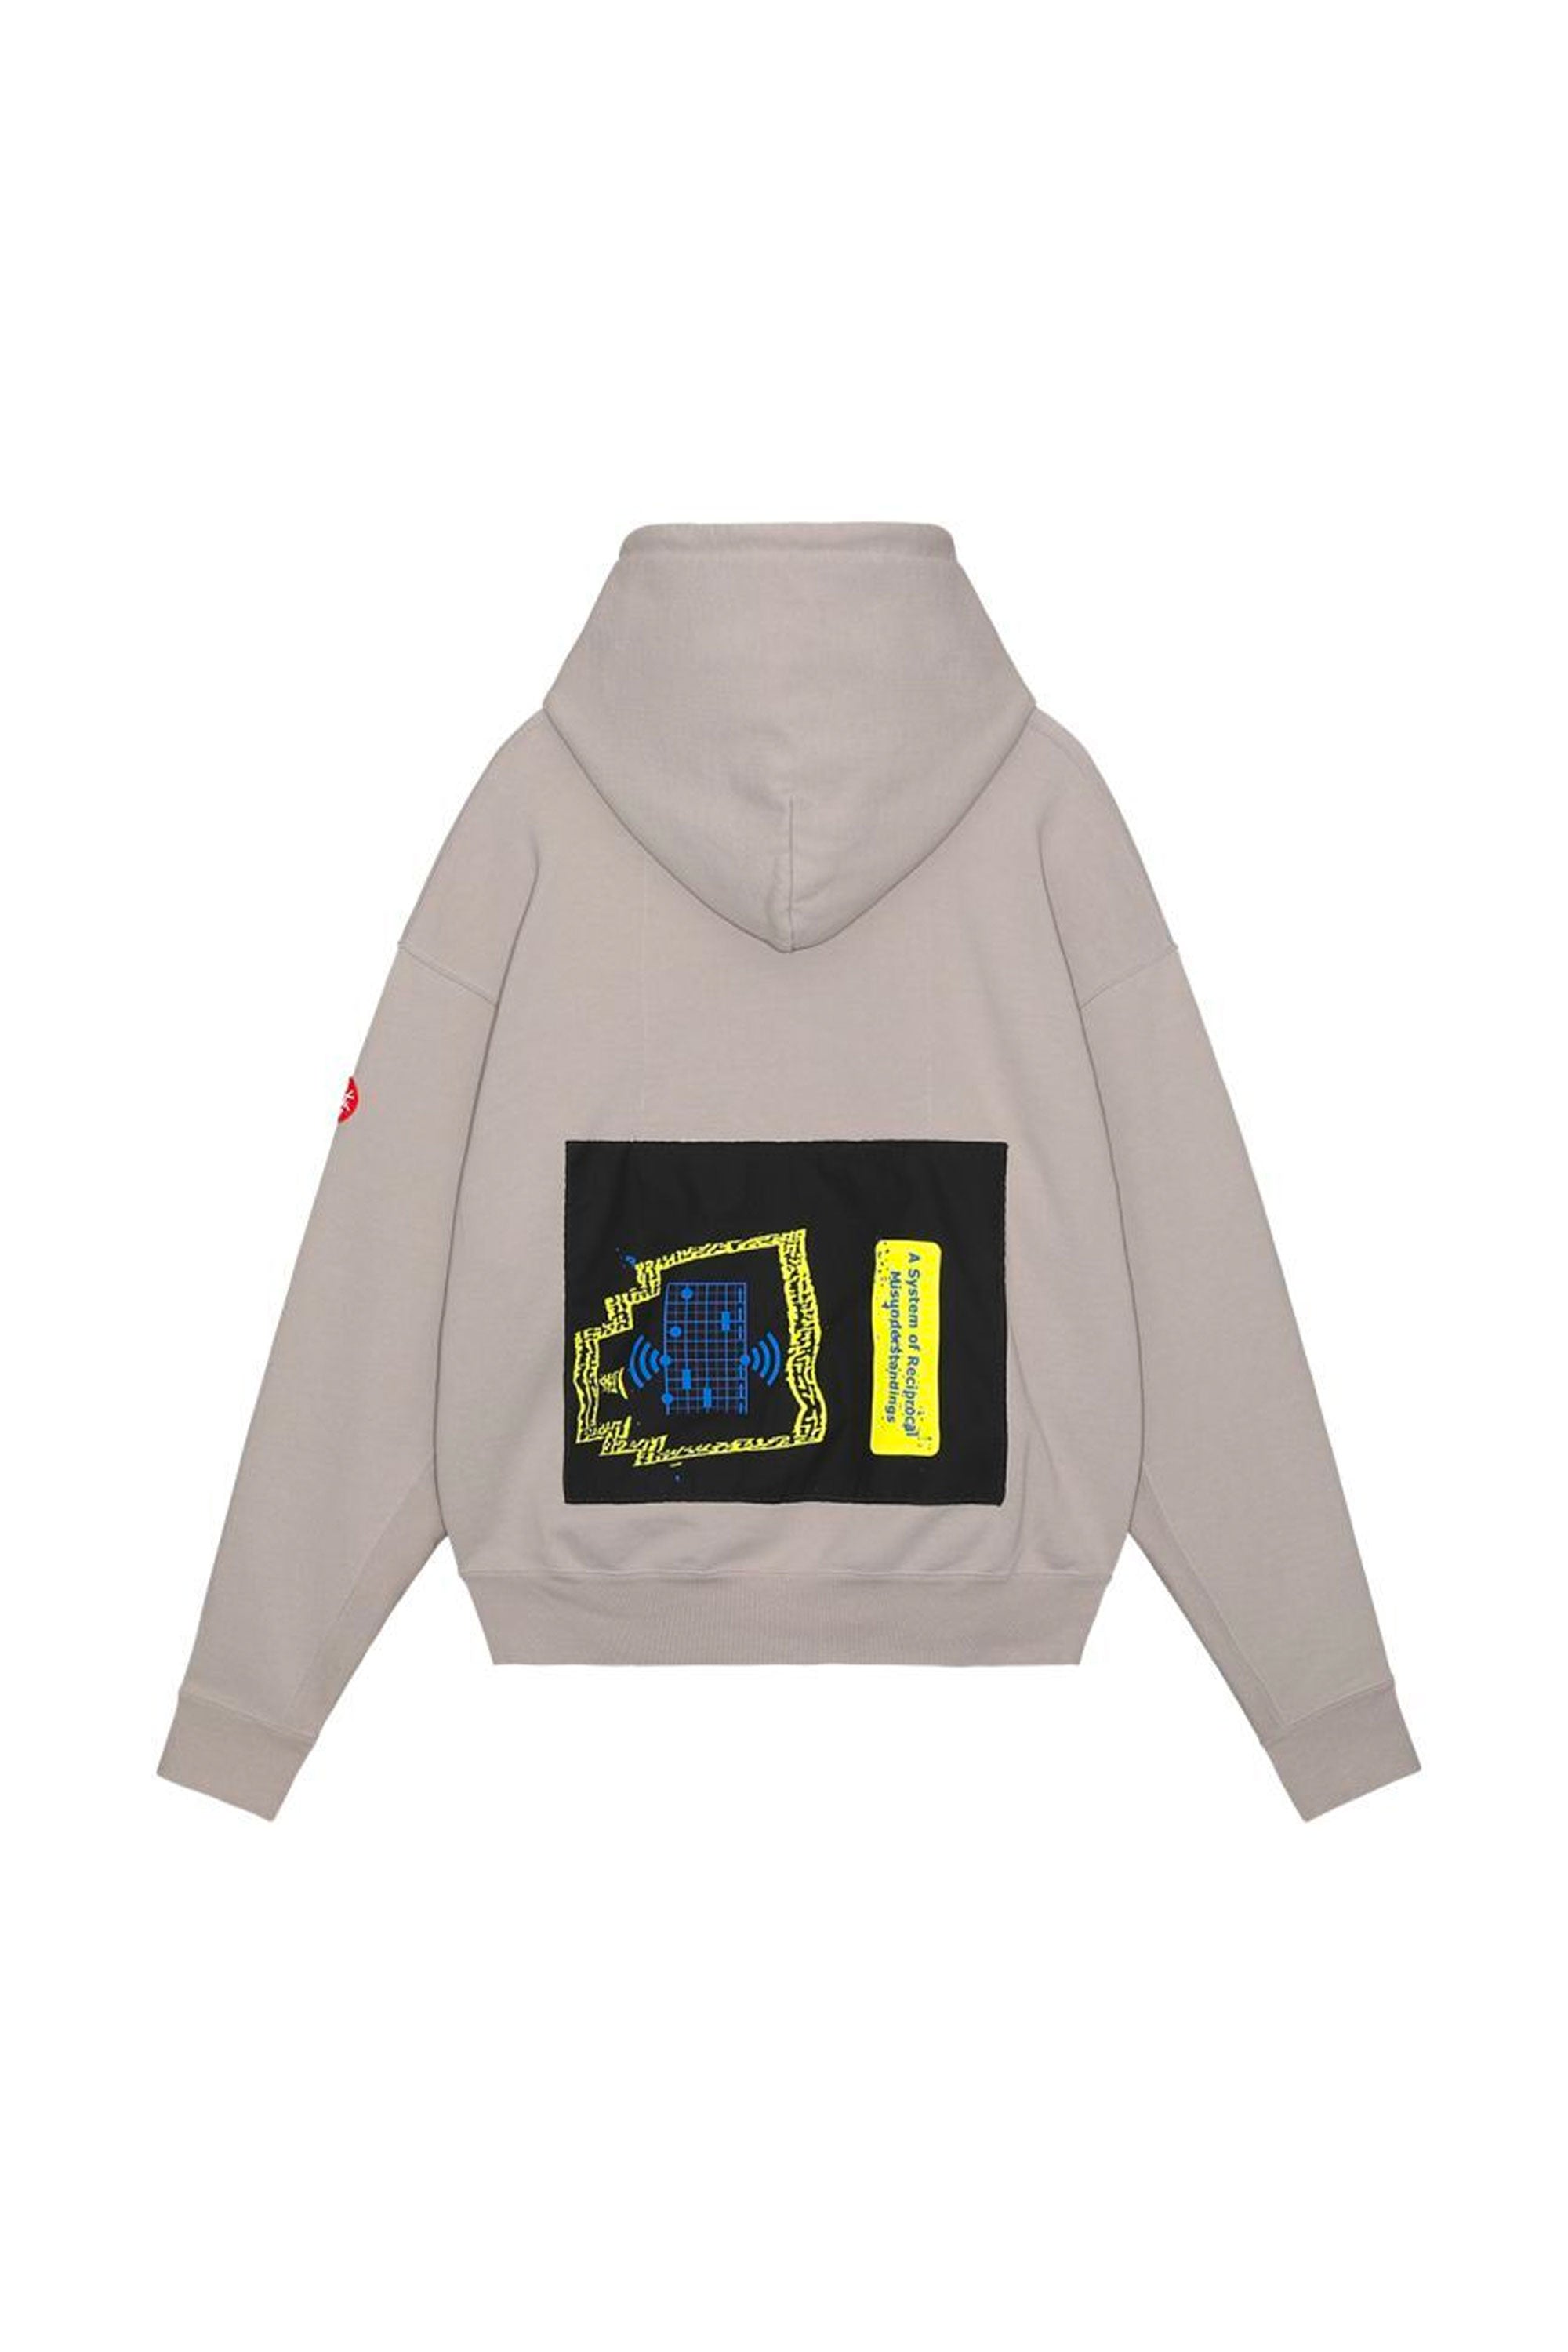 The CAV EMPT - RECIPROCAL HOODY  available online with global shipping, and in PAM Stores Melbourne and Sydney.